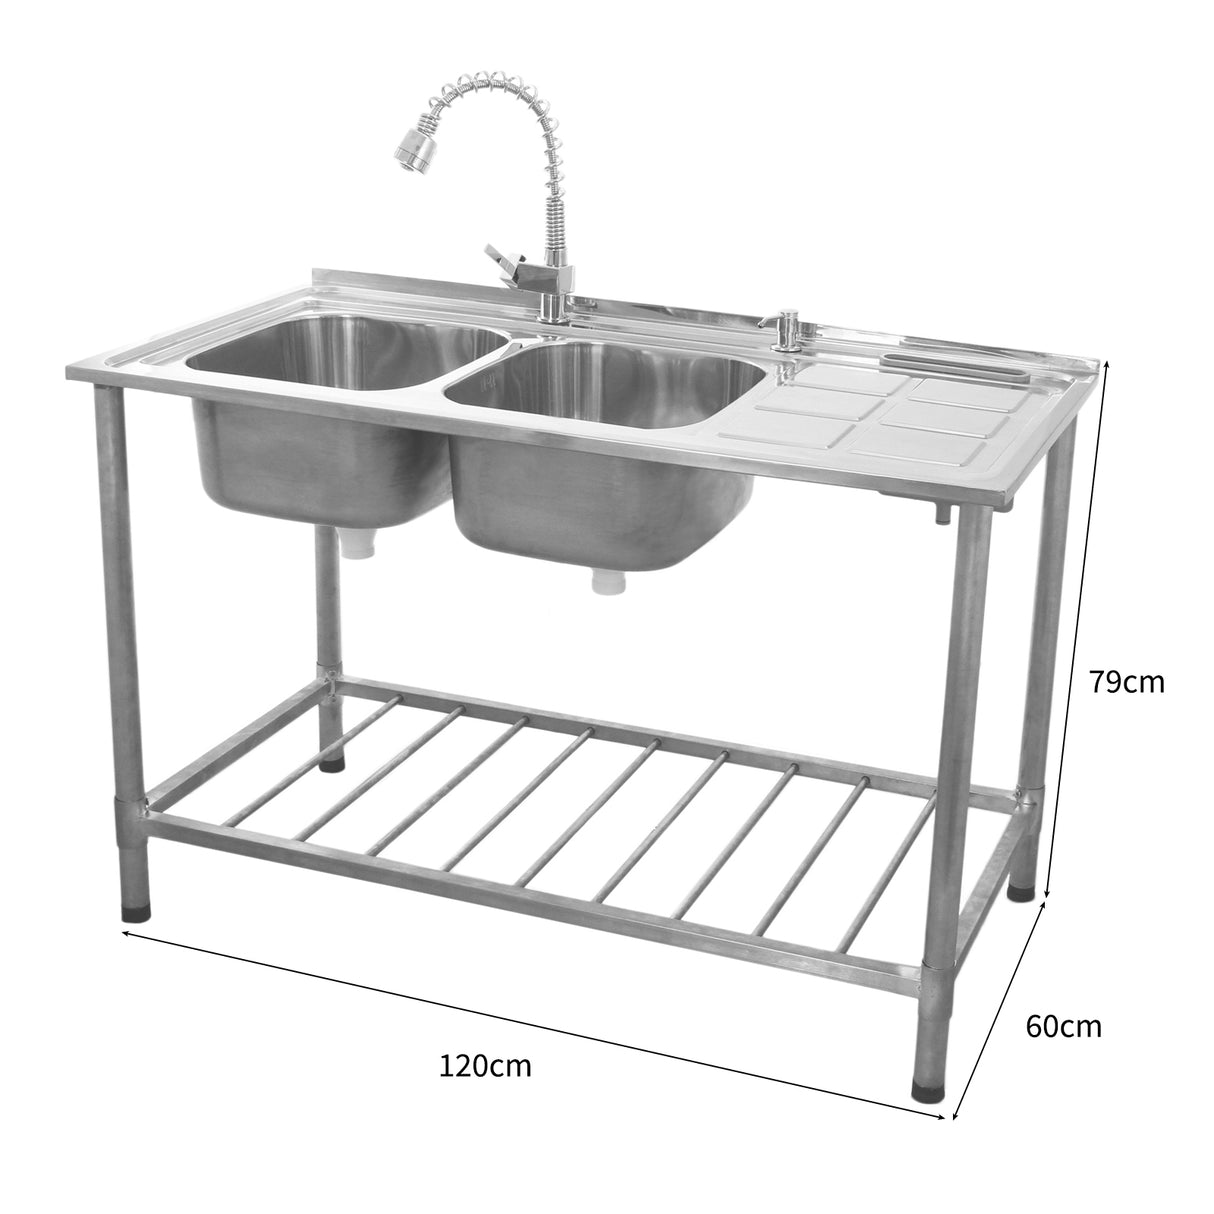 KuKoo Commercial Catering Sink Double Bowl / Right Hand Drainer